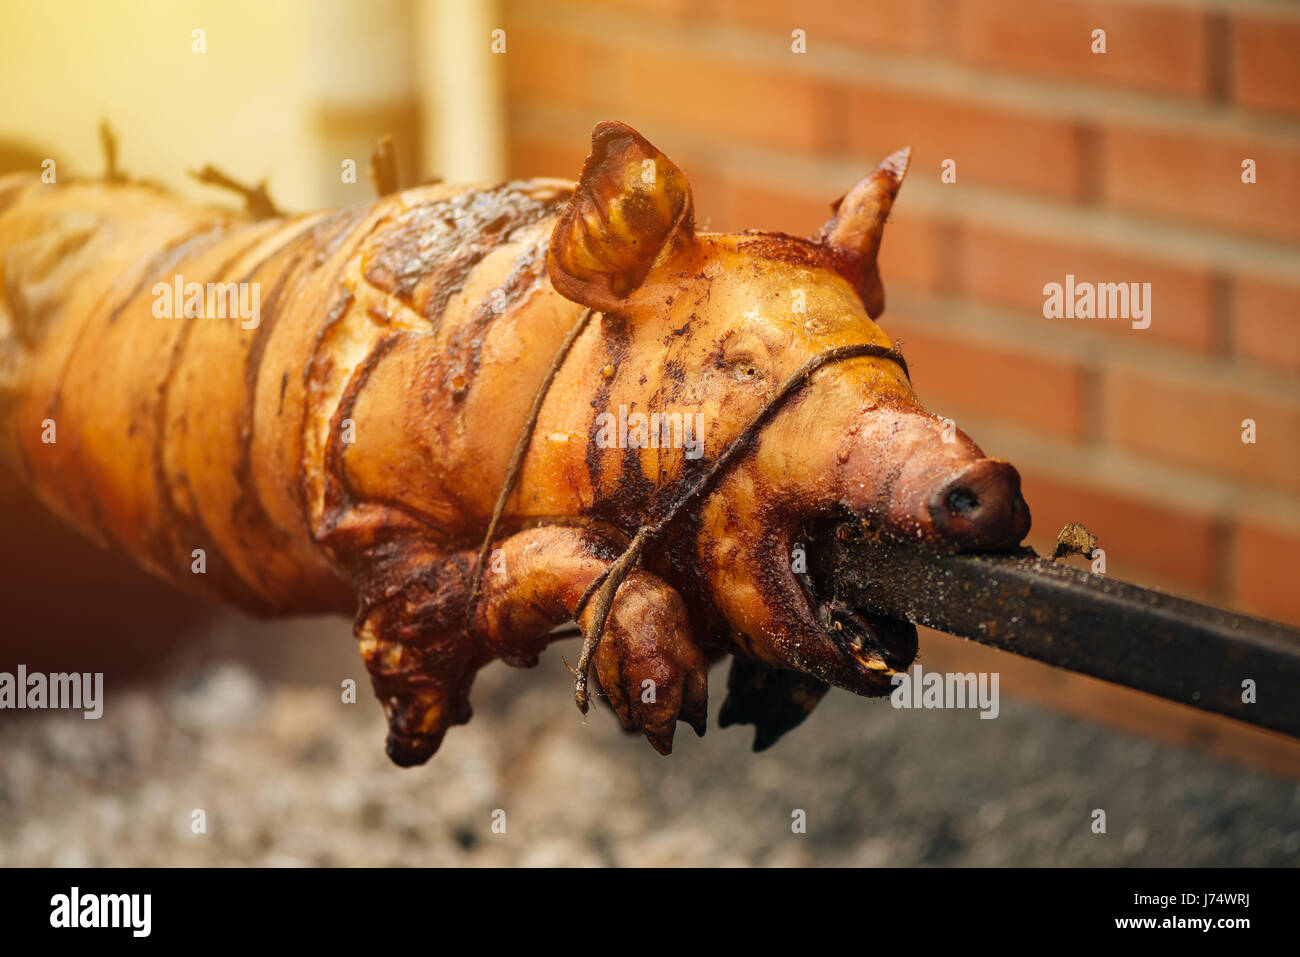 Spit roasted pig, traditional outdoor food preparation, selective focus Stock Photo